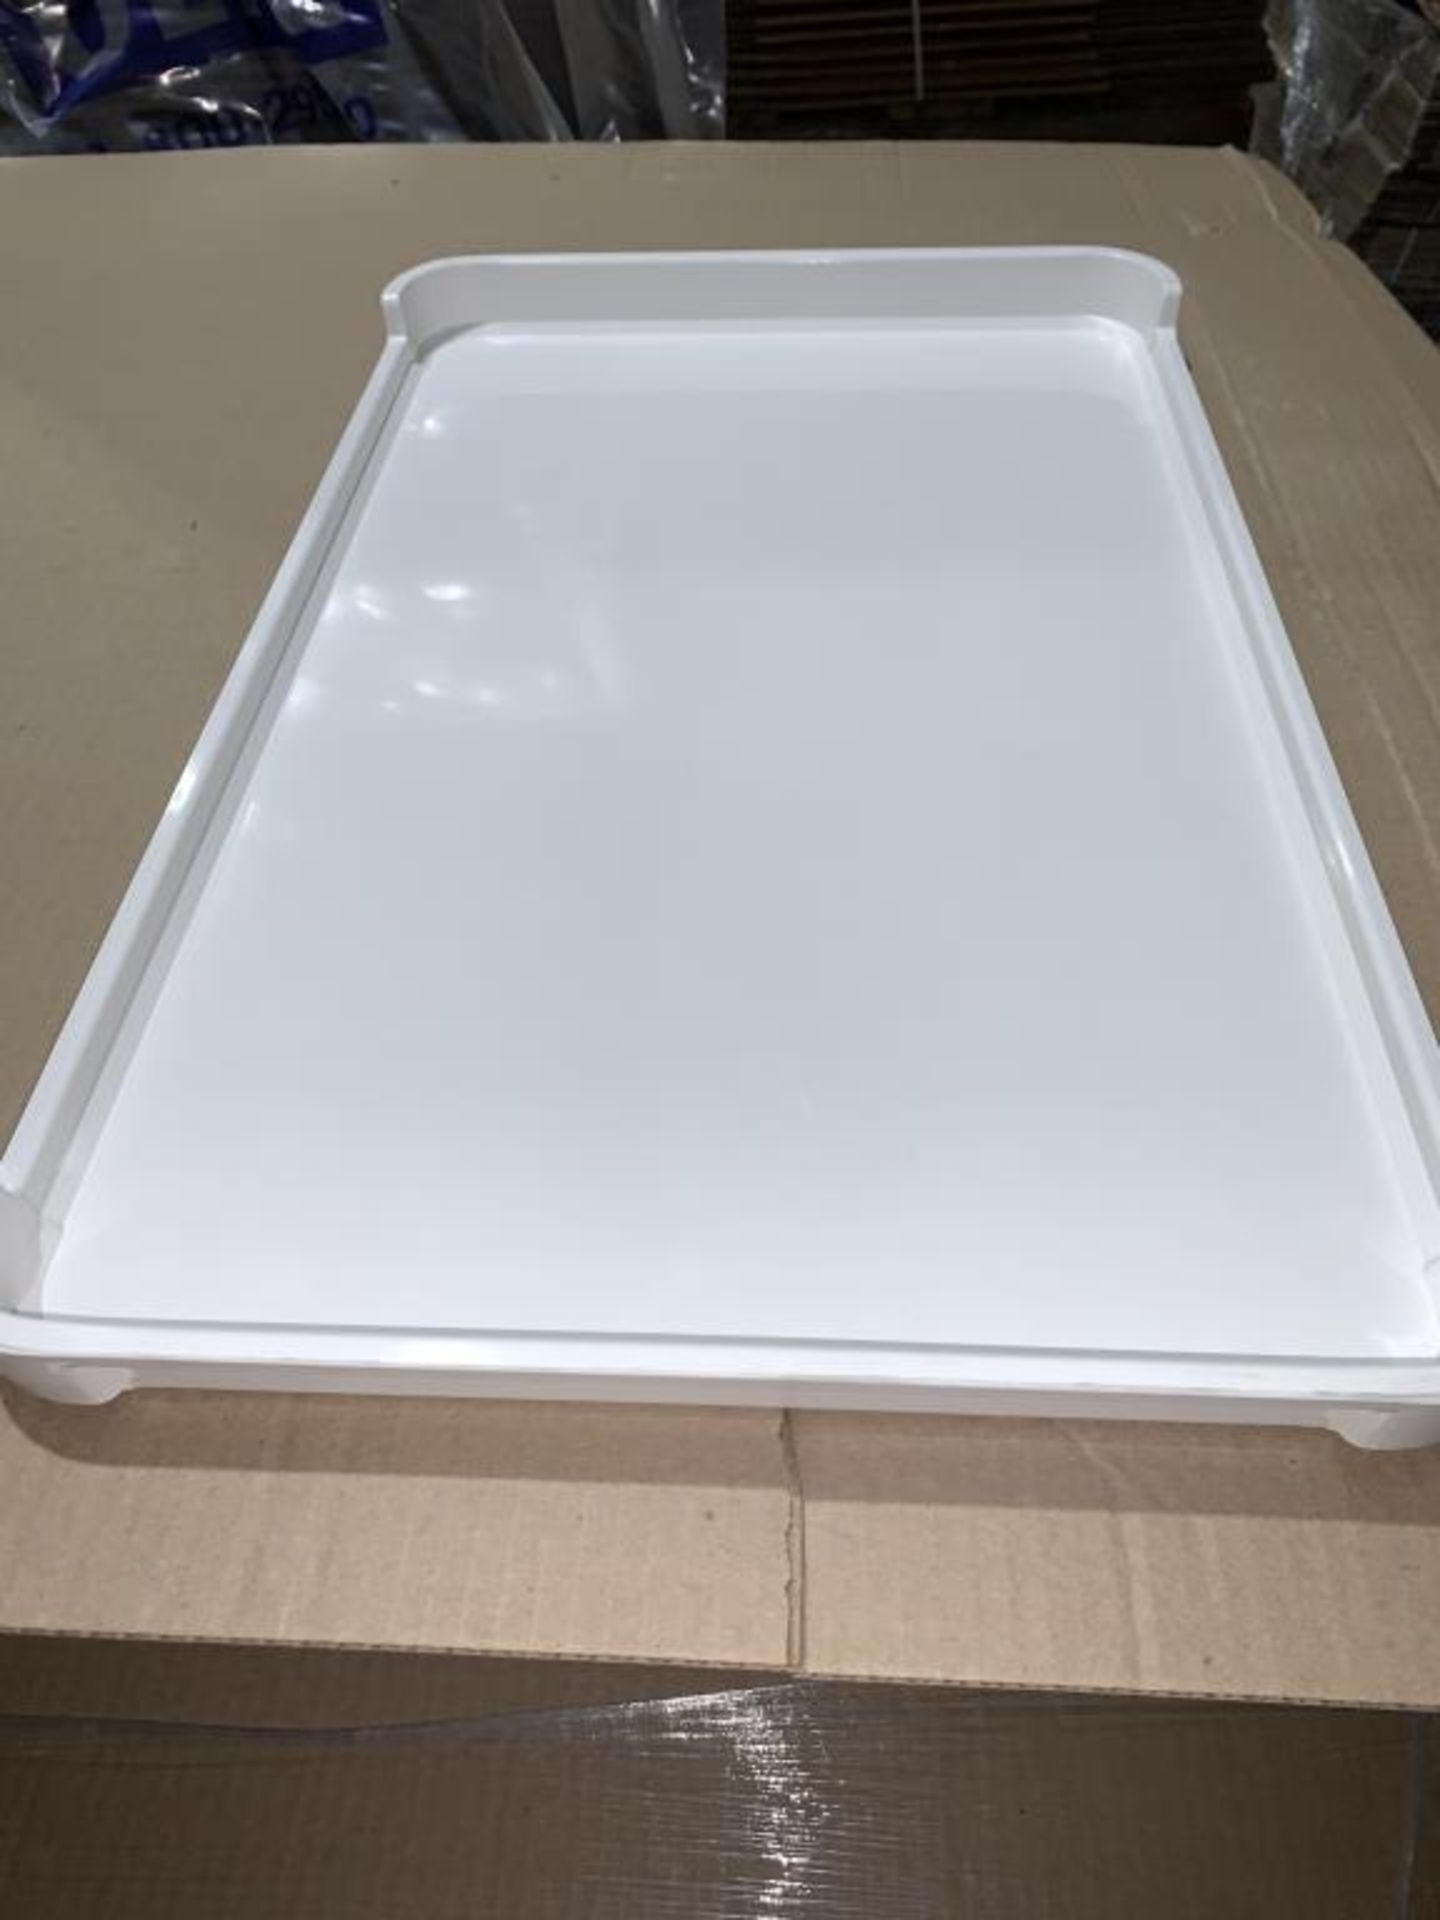 Softgel Drying Trays - Image 2 of 5